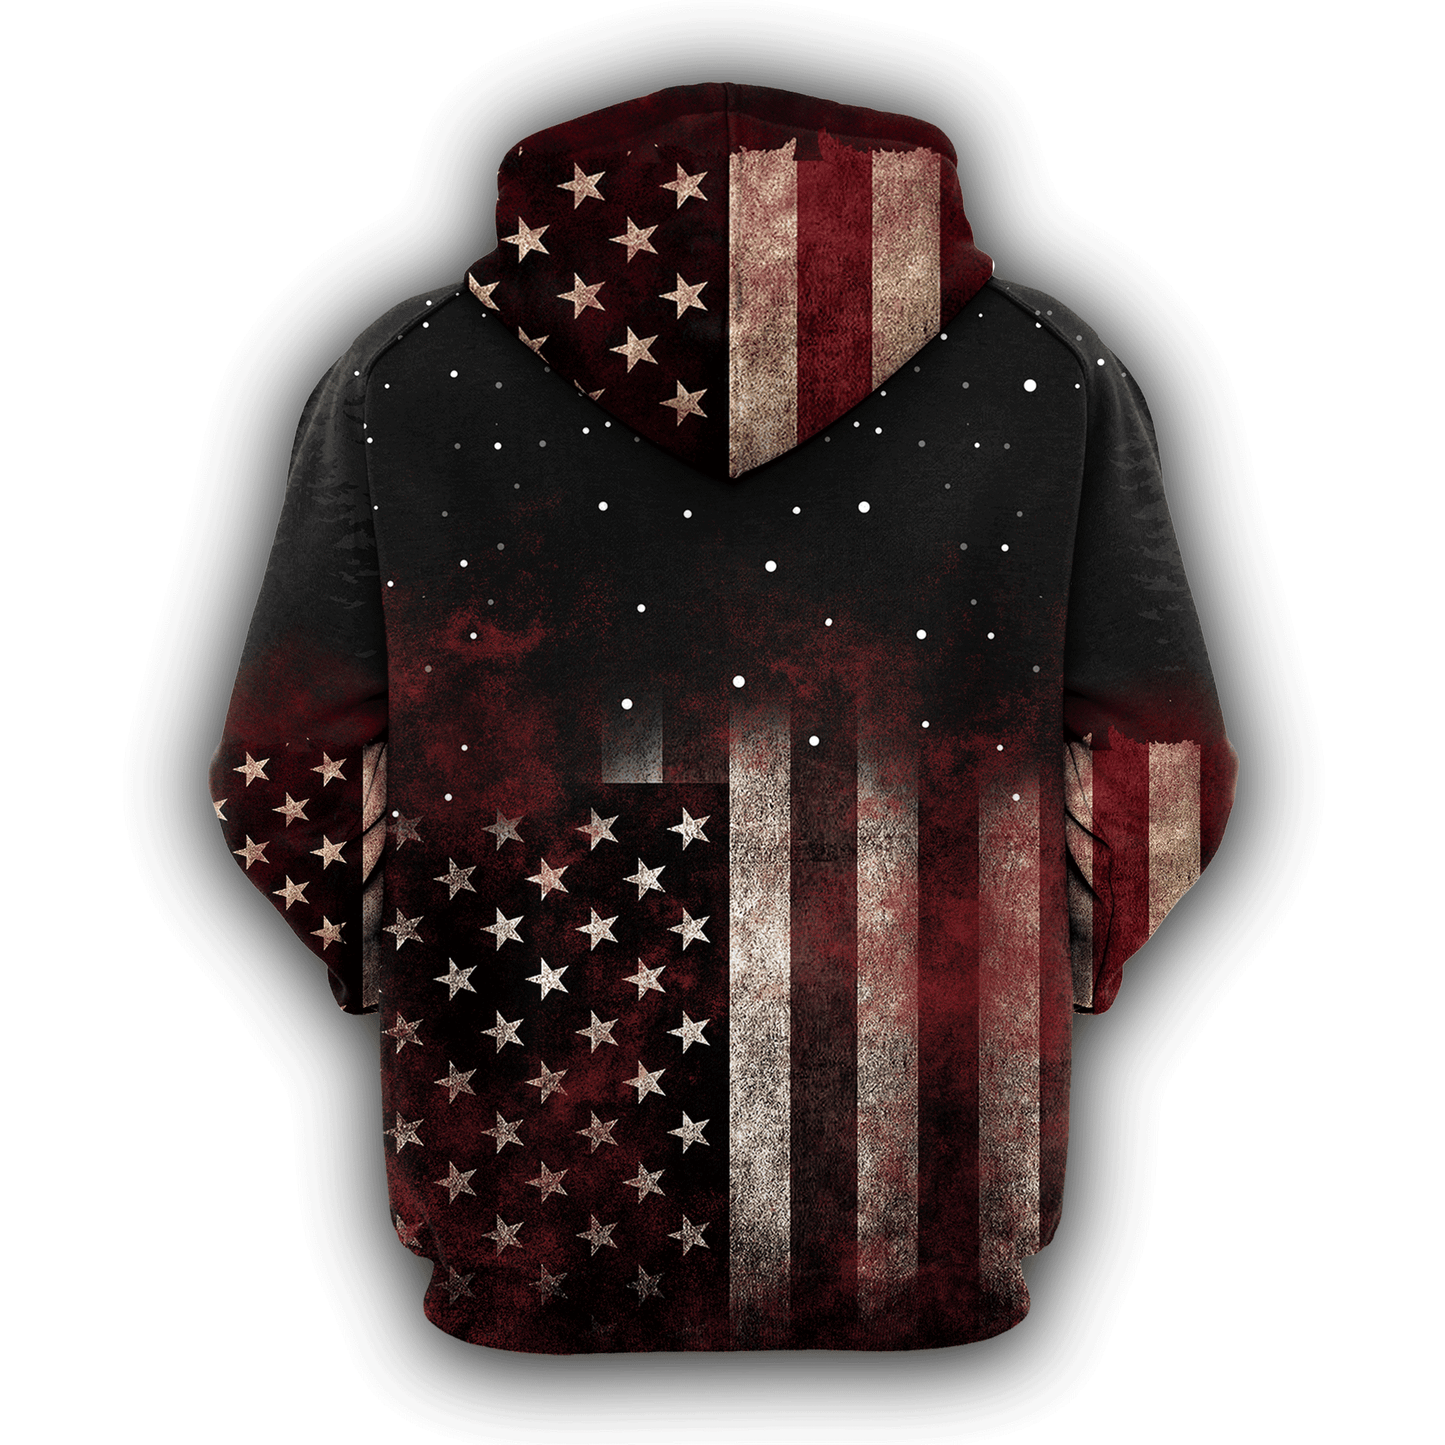 America Skull HT241121 Unisex womens & mens, couples matching, friends, funny family sublimation 3D hoodie christmas holiday gifts (plus size available)